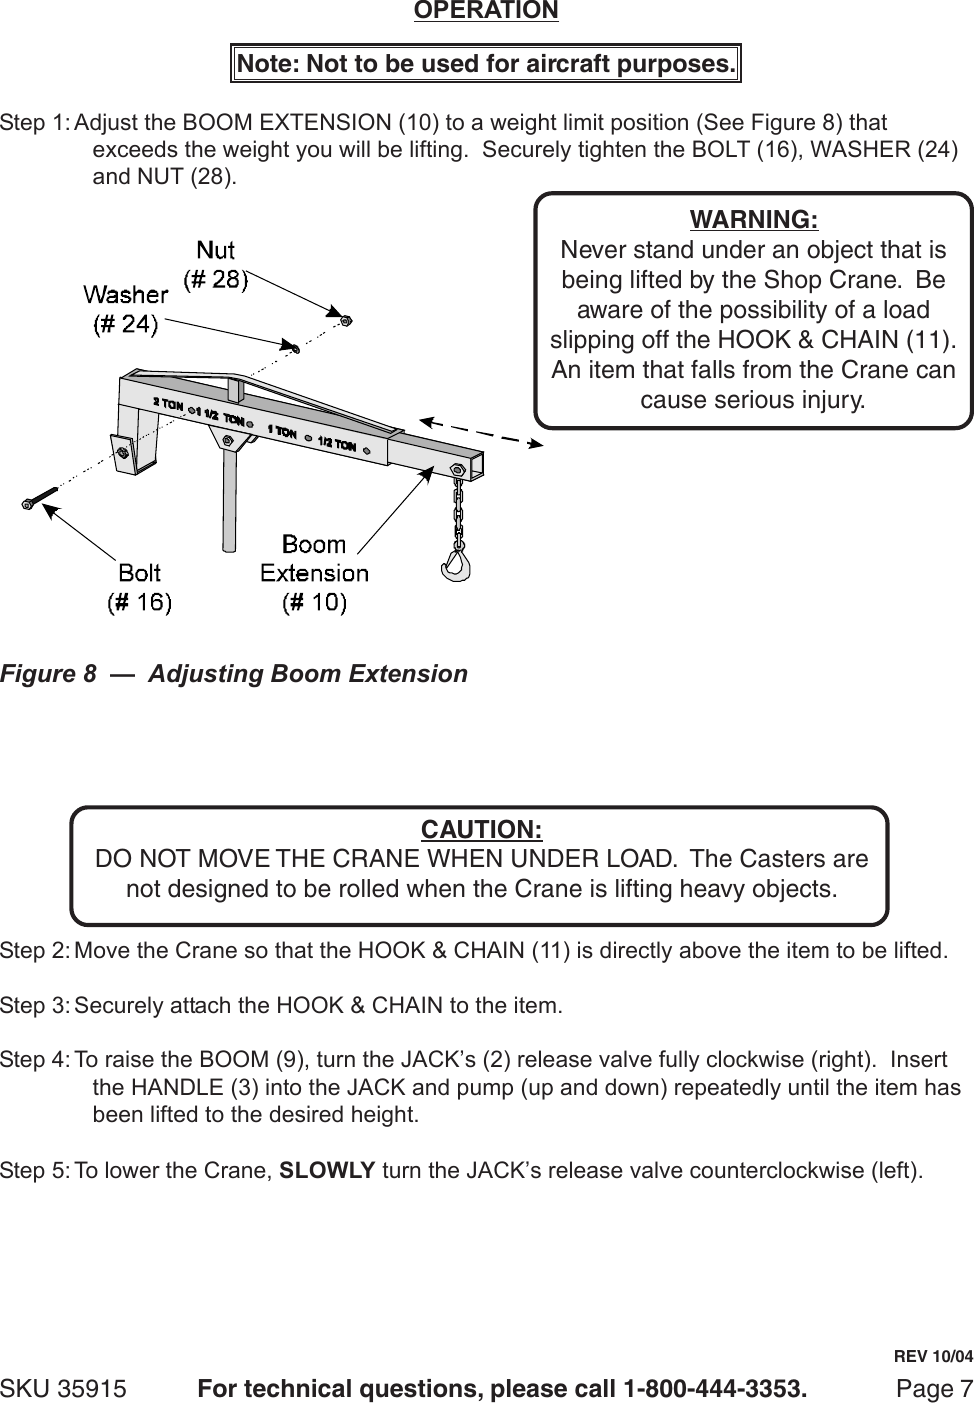 Page 7 of 11 - Central-Hydraulics Central-Hydraulics-2-Ton-Foldable-Shop-Crane-35915-Users-Manual- 35915 Jack Manual  Central-hydraulics-2-ton-foldable-shop-crane-35915-users-manual